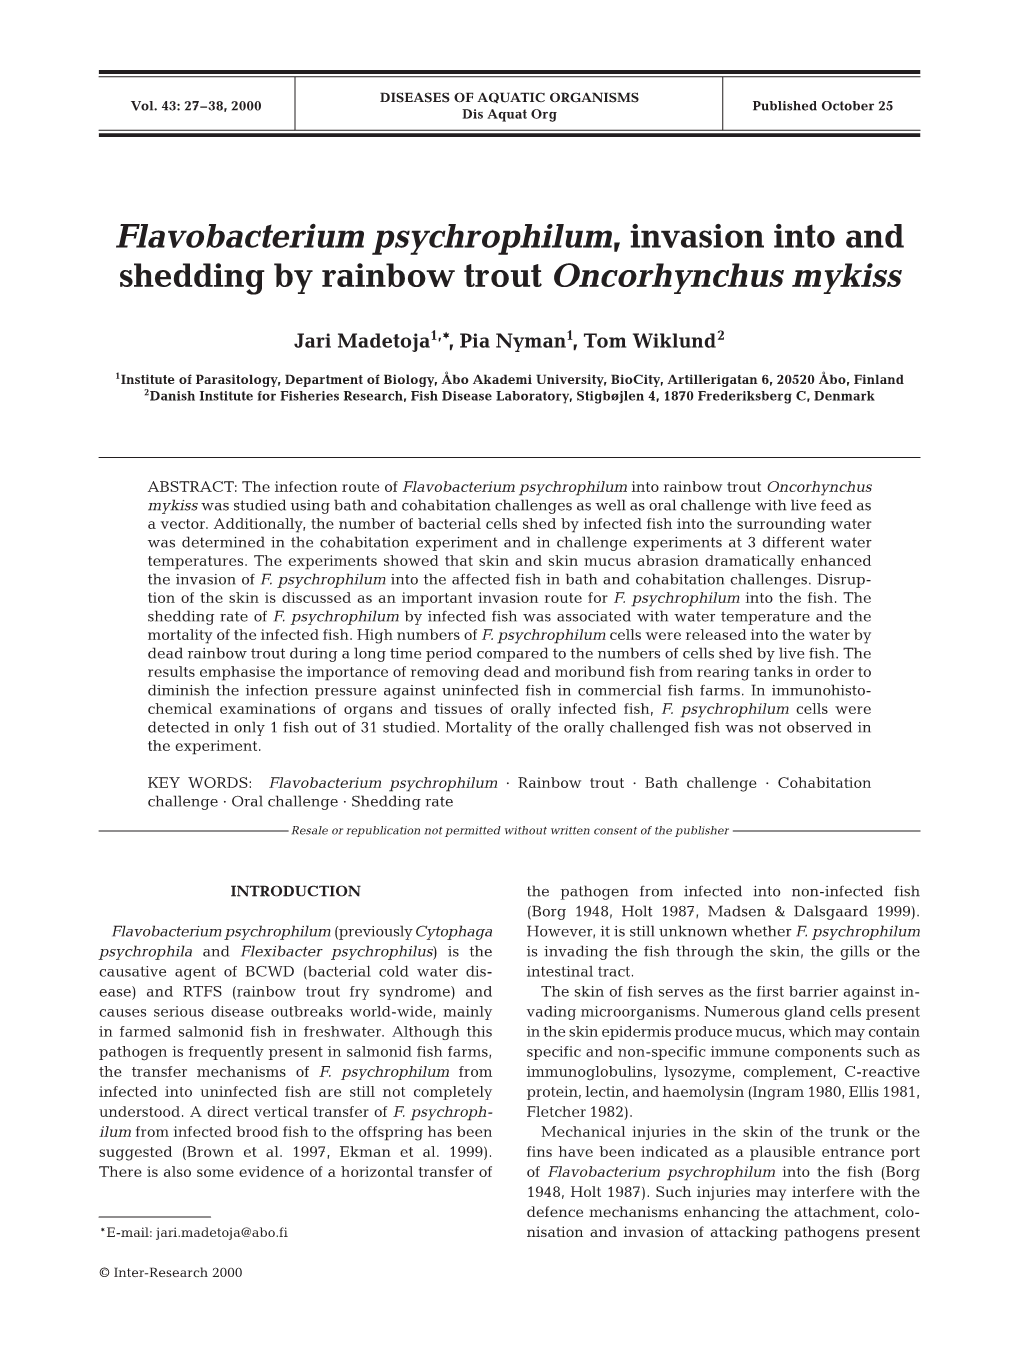 Flavobacterium Psychrophilum, Invasion Into and Shedding by Rainbow Trout Oncorhynchus Mykiss